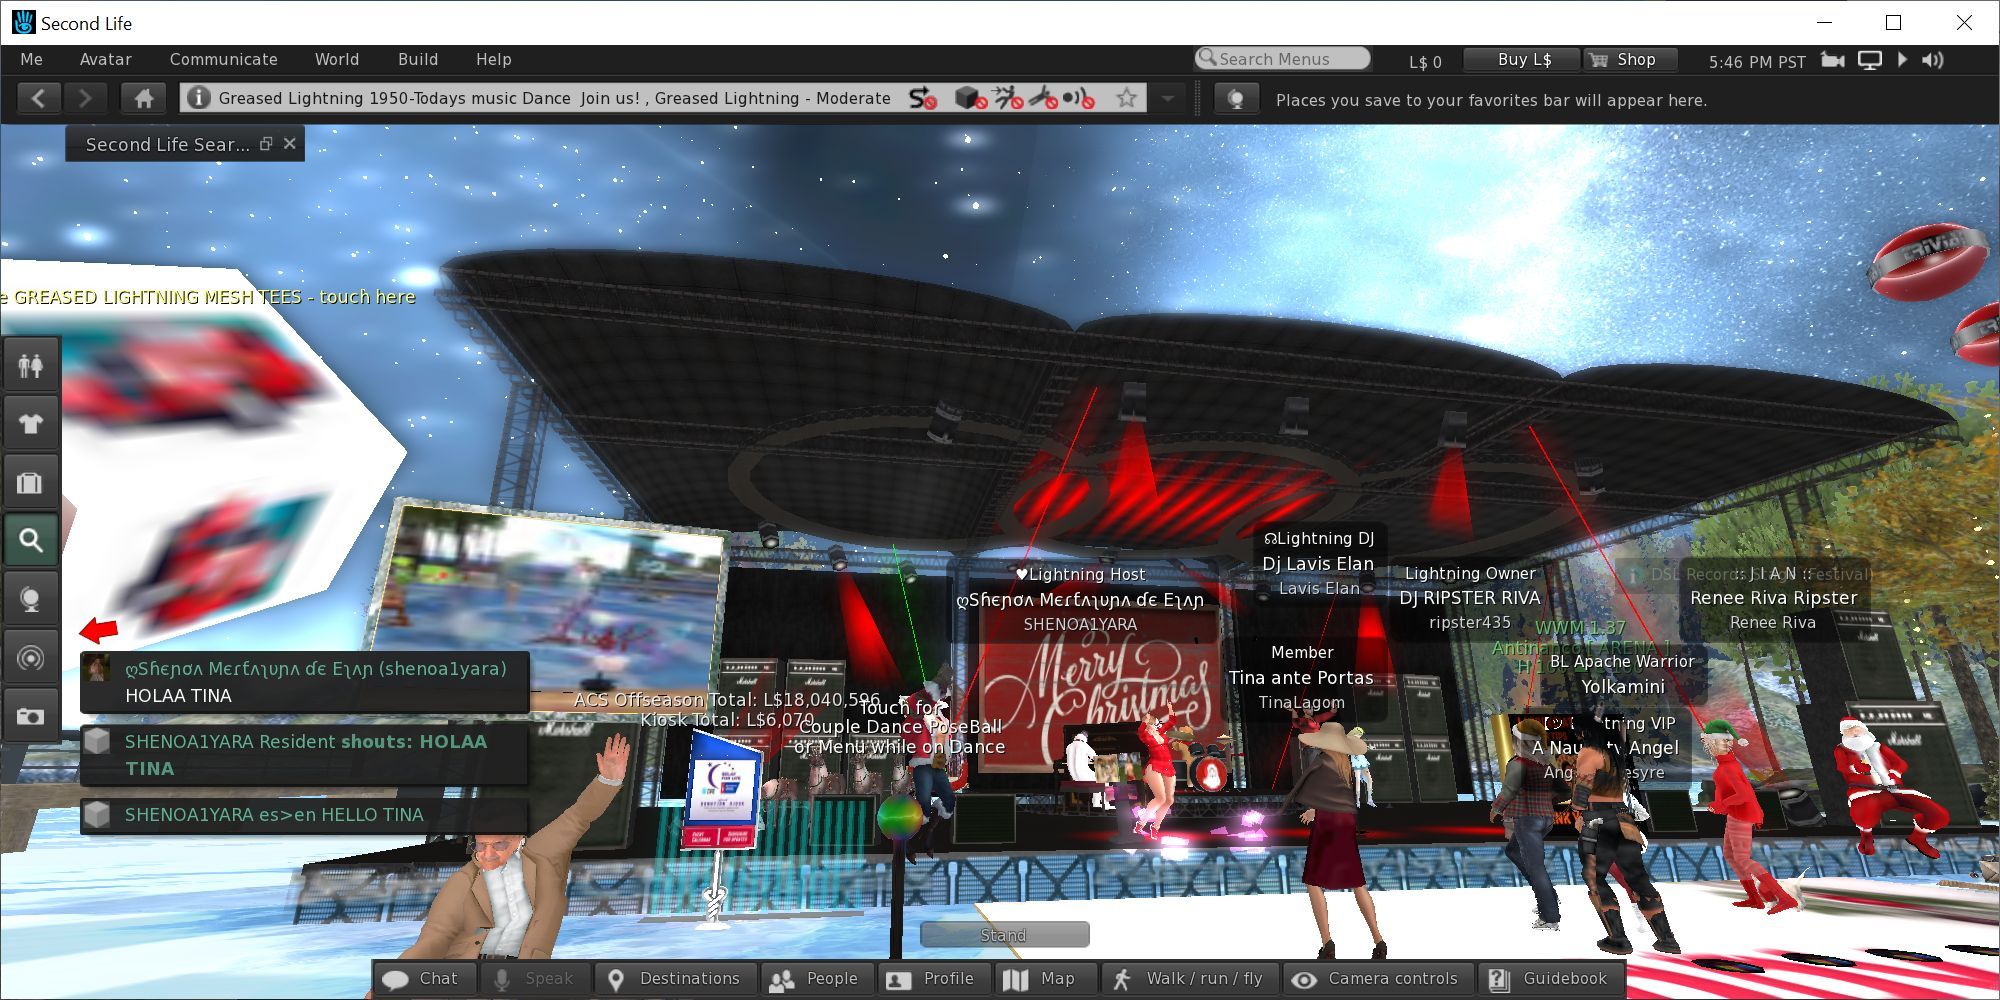 How to Get Started In Second Life in 10 Easy Steps